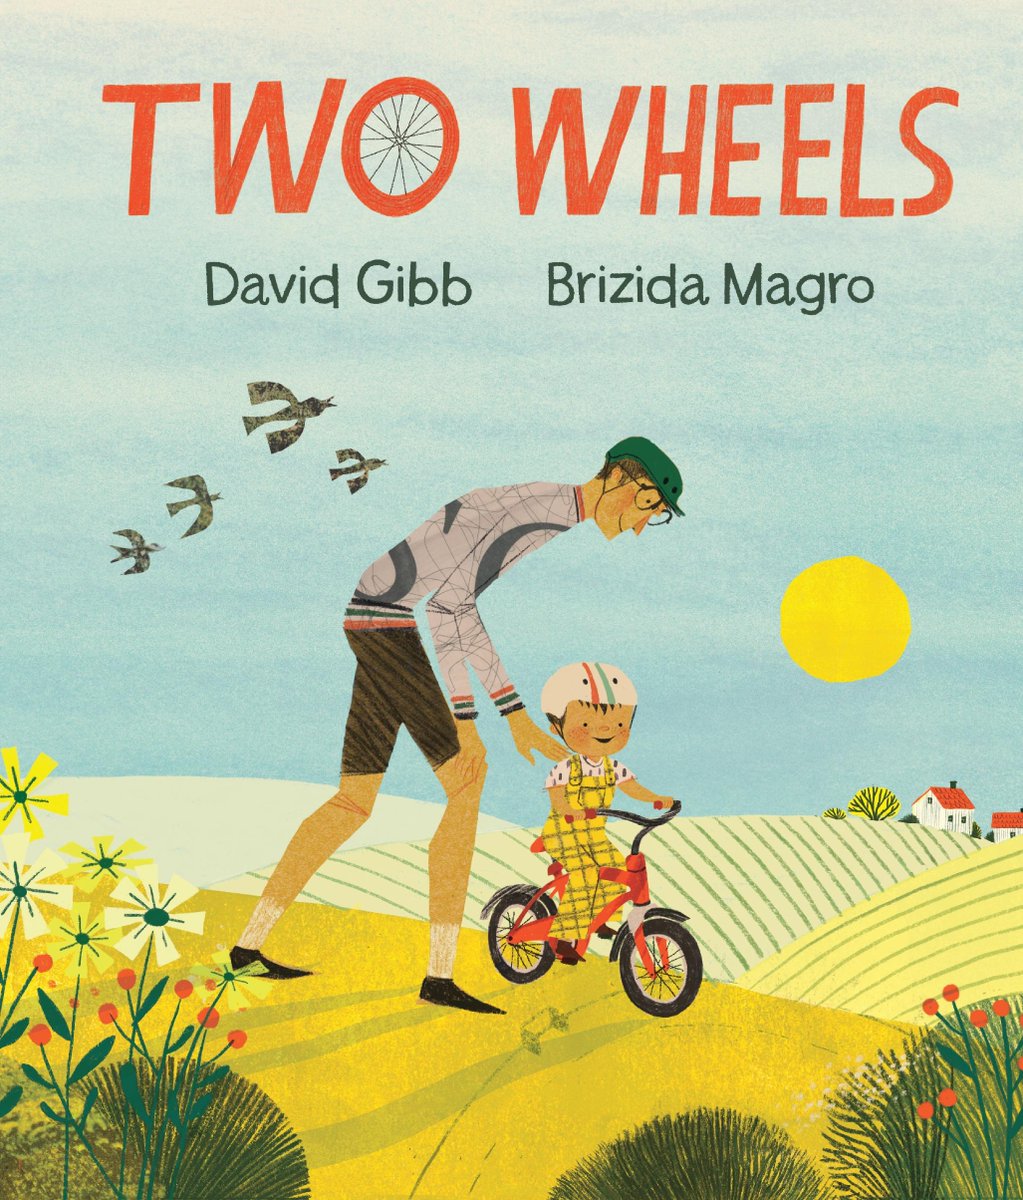 Ding Ding! TWO WHEELS by @DavidGibb and @BrizidaMagro publishes today 🚴 A marvellously stylish picture book sharing the journey of a young boy learning to ride a bike, with the help of supportive Dad. It is charming, heartfelt storytelling perfect for the summertime ☀️